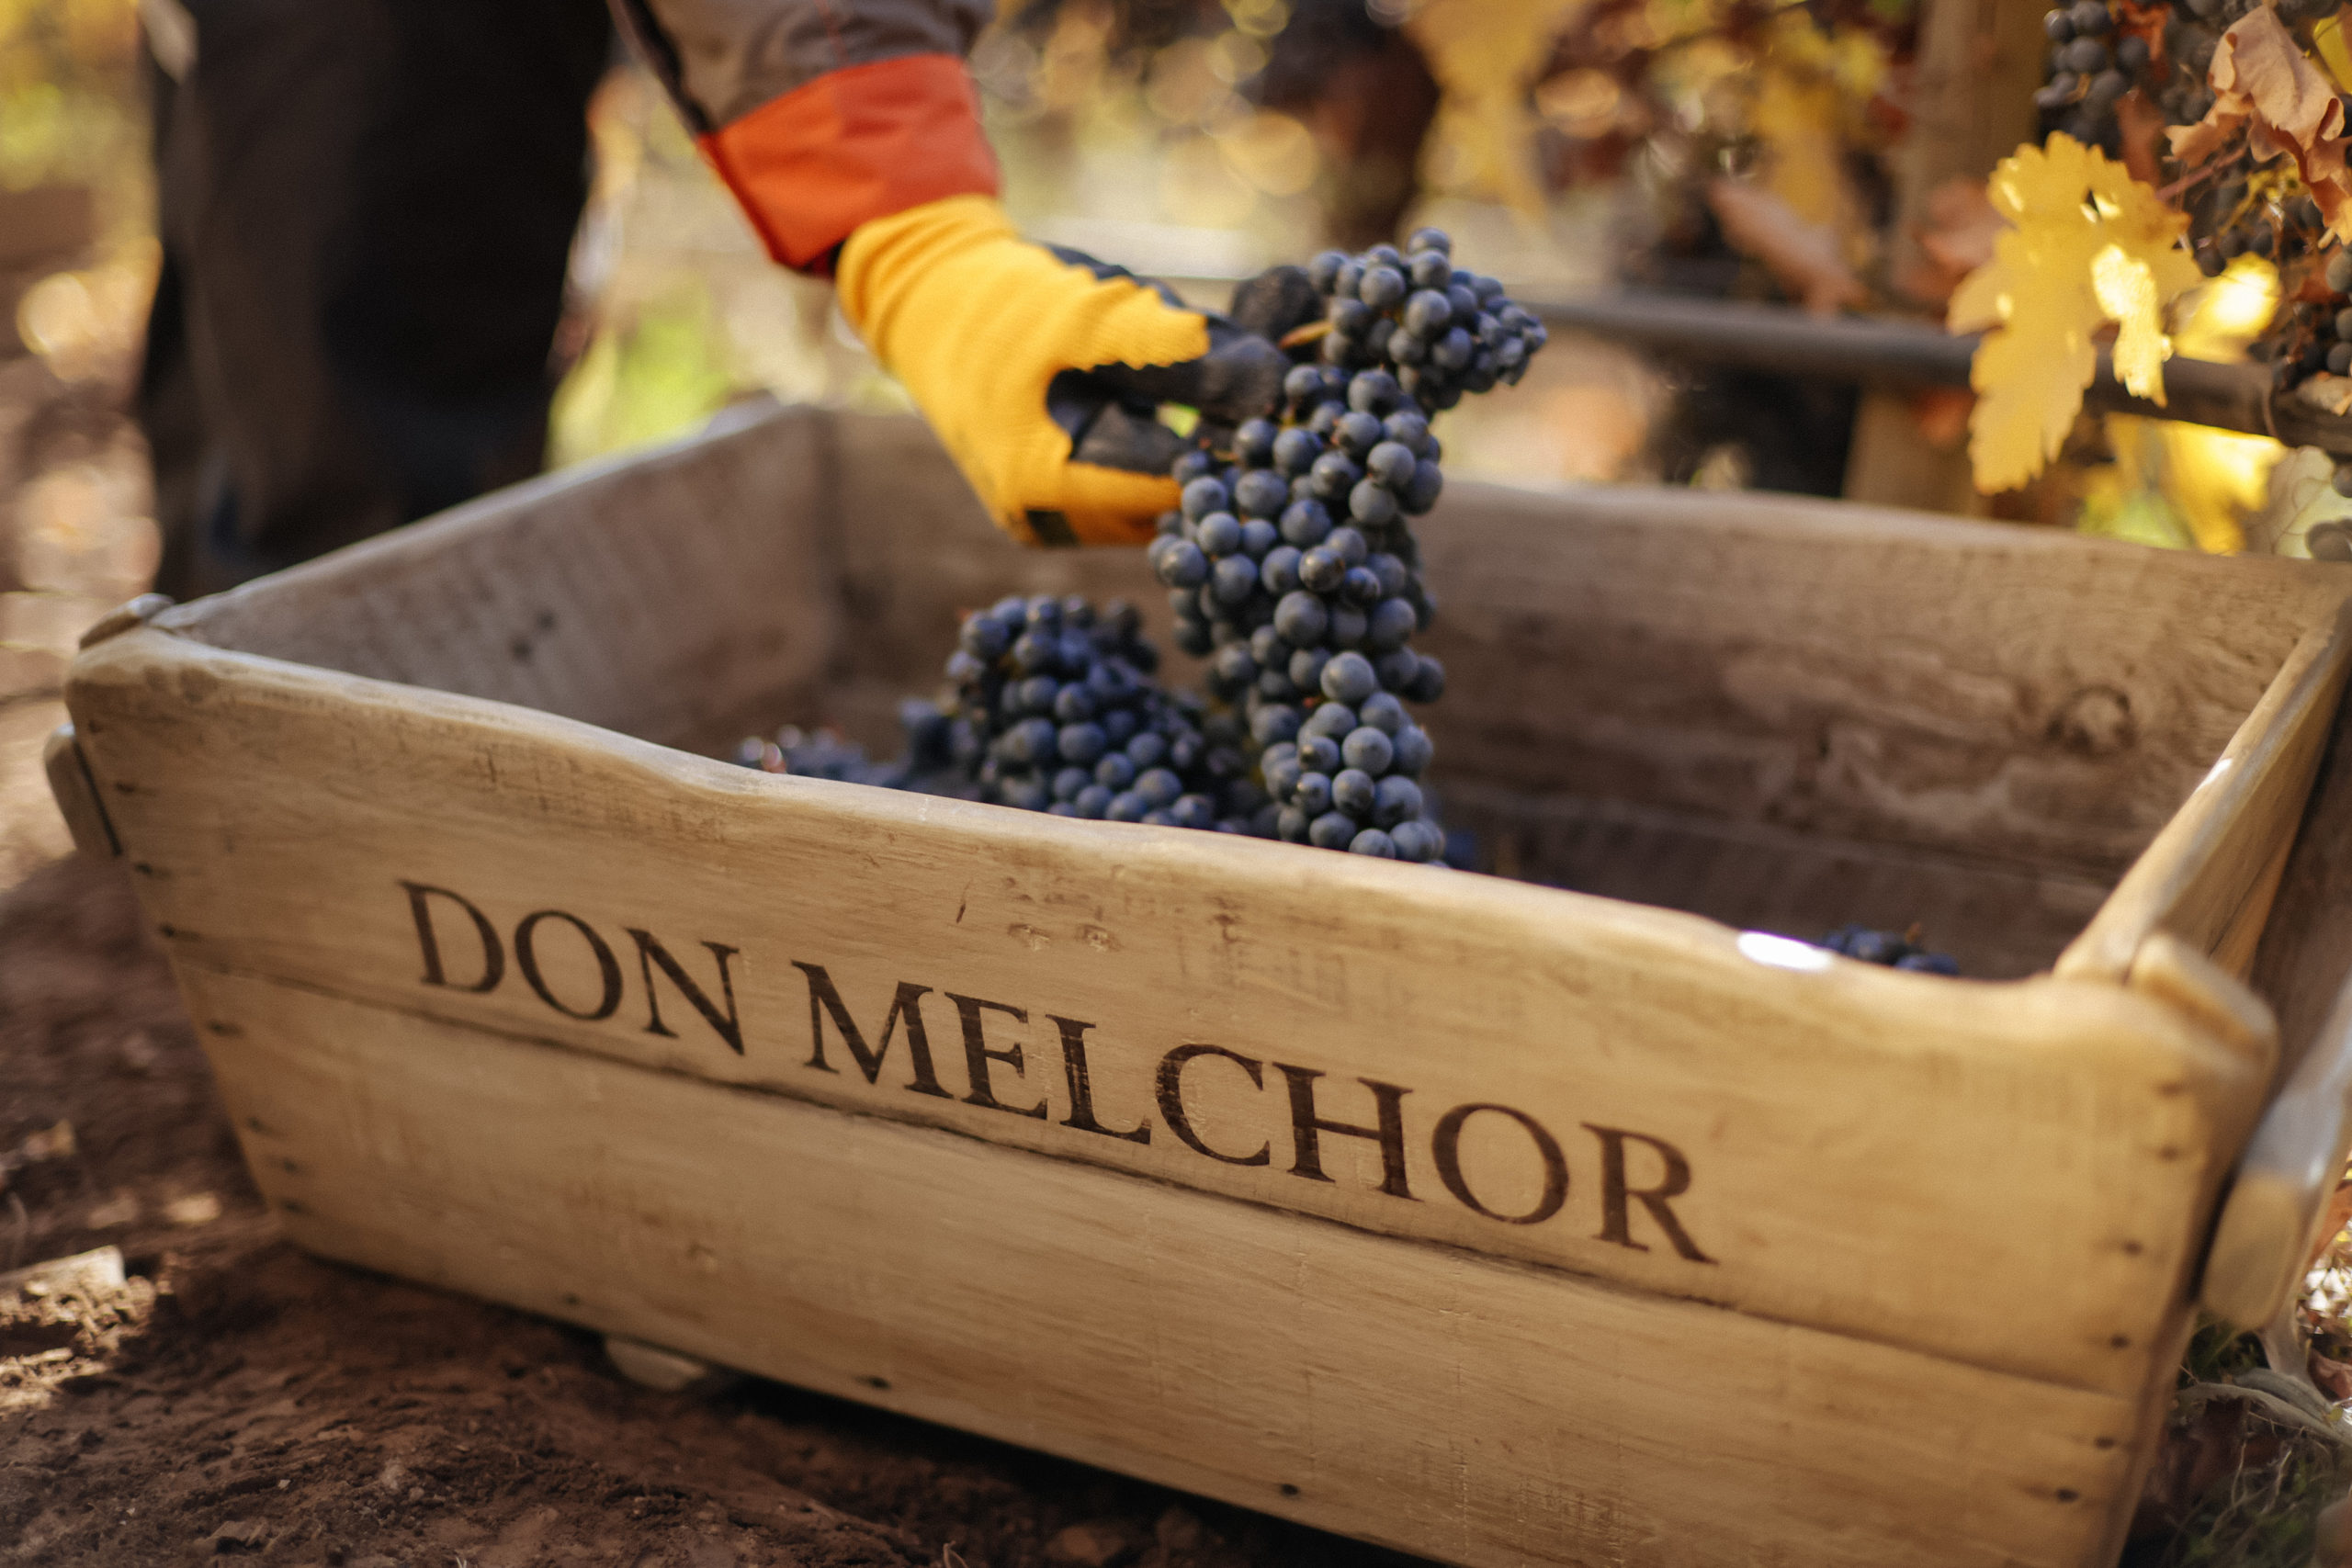 The Drinks Business has praised the 2020 Don Melchor as the “best expression yet”